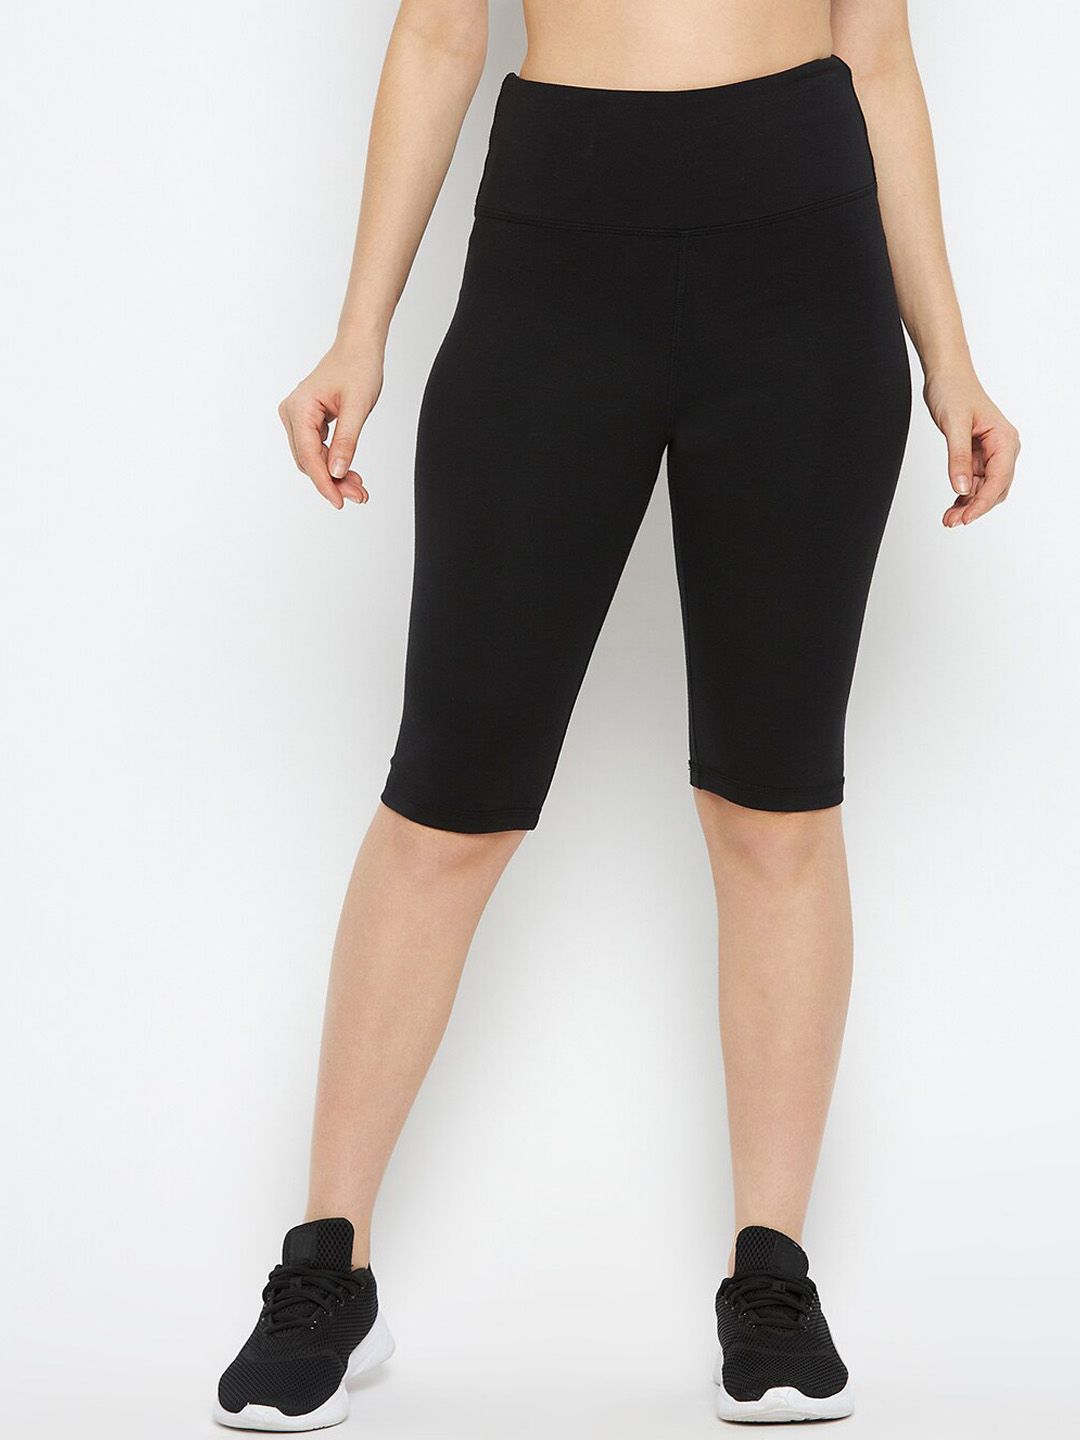 Hypernation Women Black Solid Cotton Lycra Bicycle Shorts Price in India